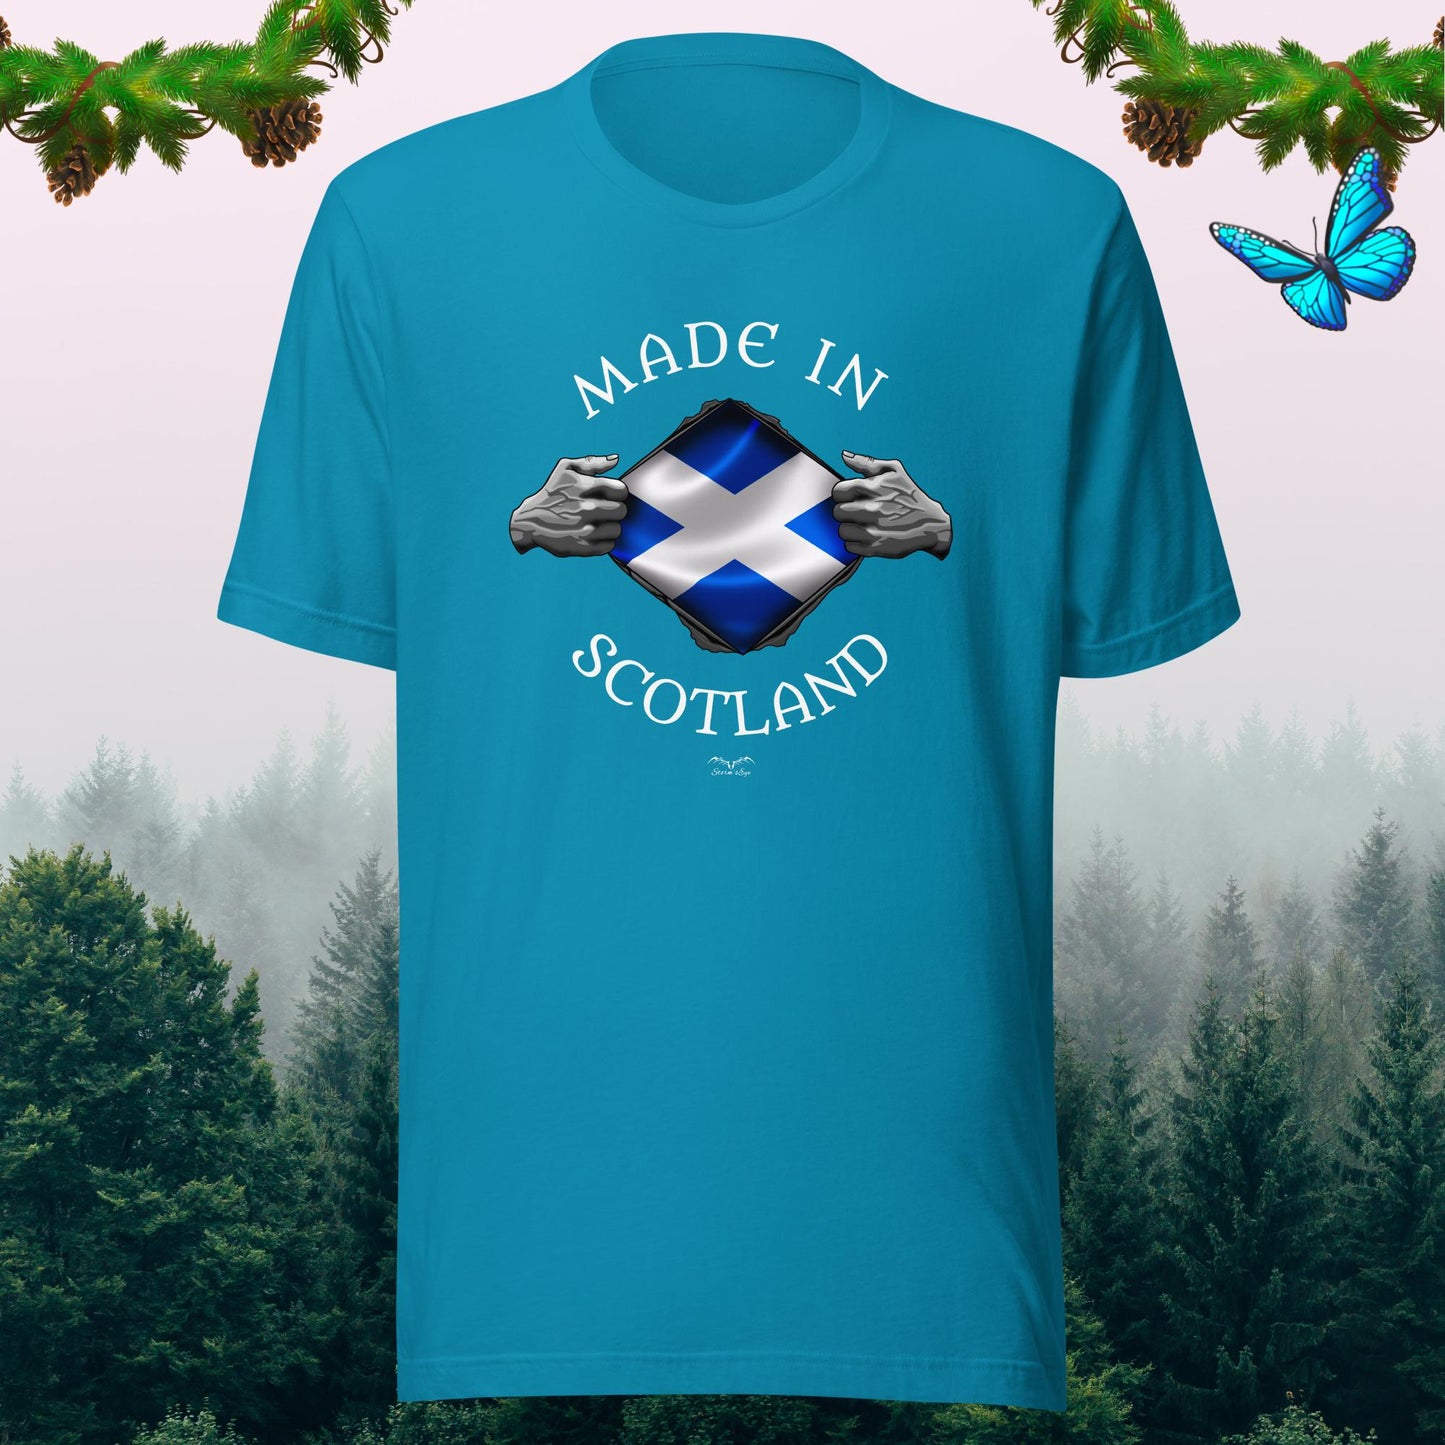 Made In Scotland Patriotic Scottish t-shirt, bright blue, by Stormseye Design